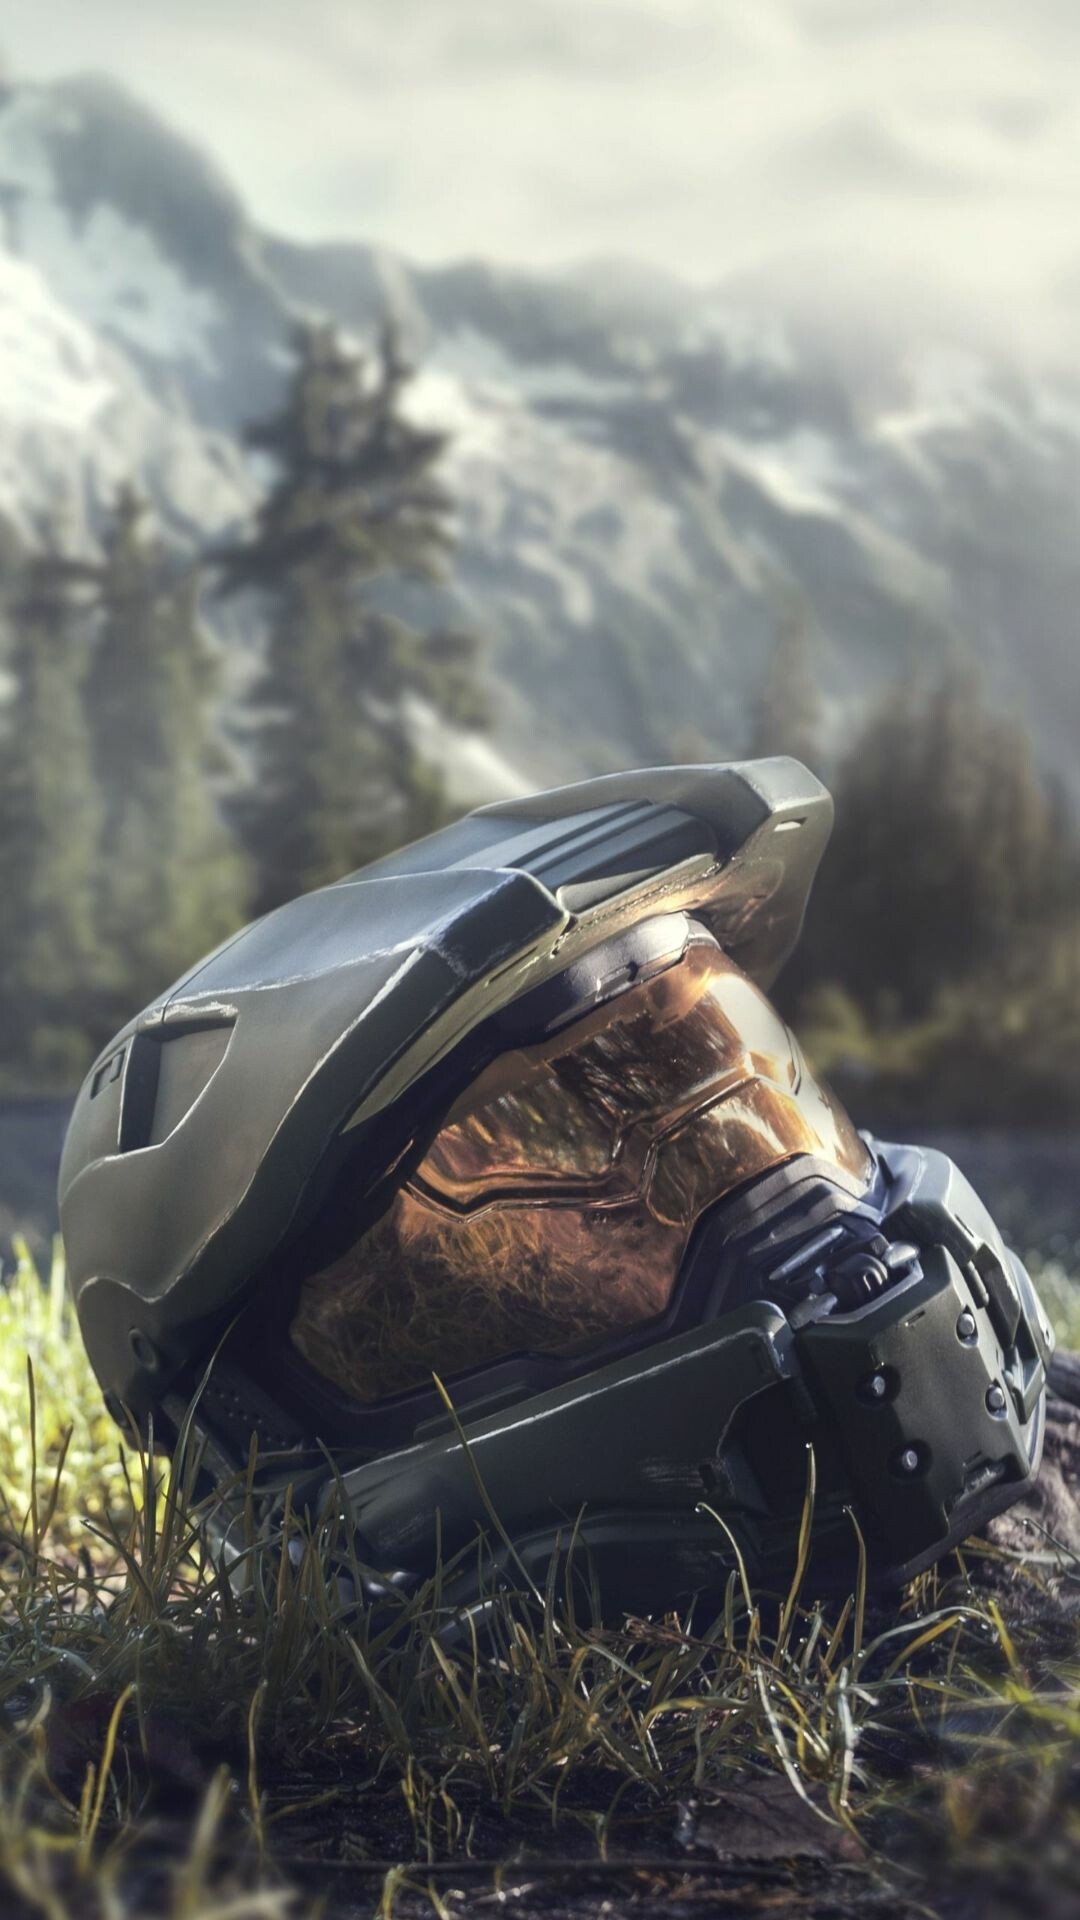 Halo wallpapers, Desktop backgrounds, Mobile wallpapers, Gaming nostalgia, 1080x1920 Full HD Phone